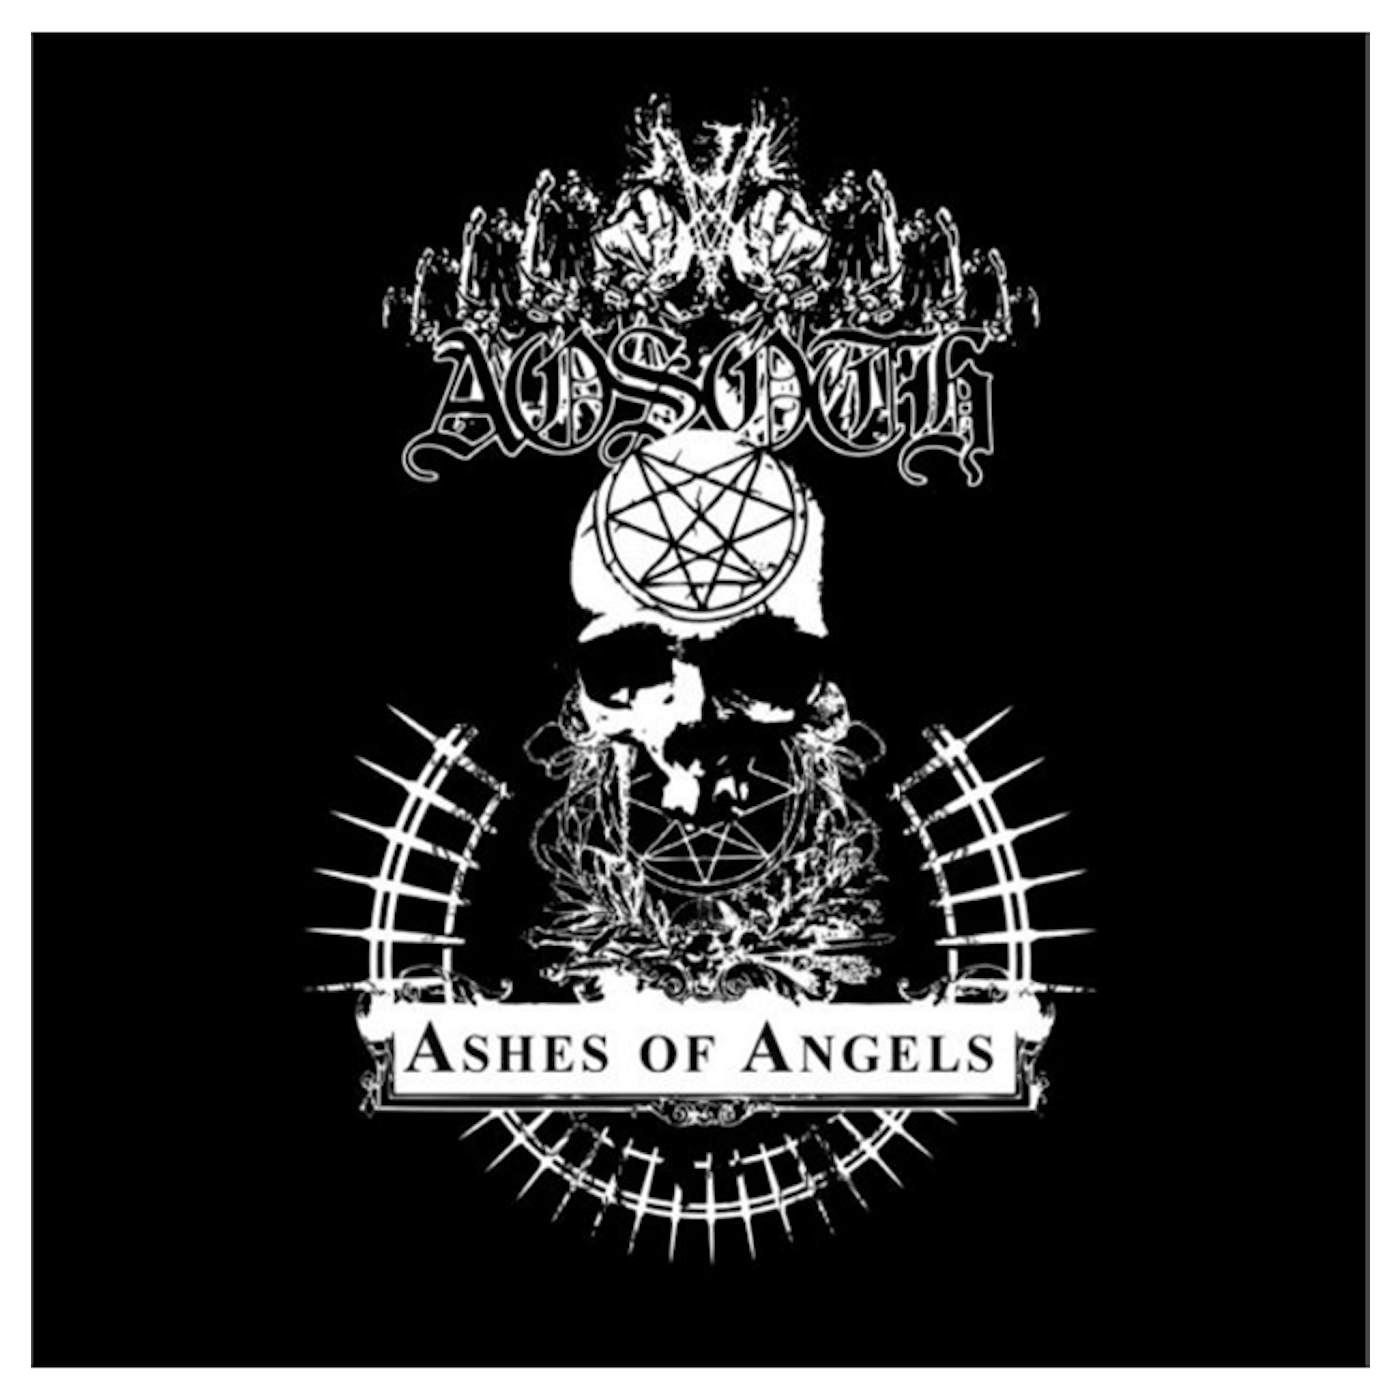 AOSOTH - 'Ashes of Angels' DigiCD